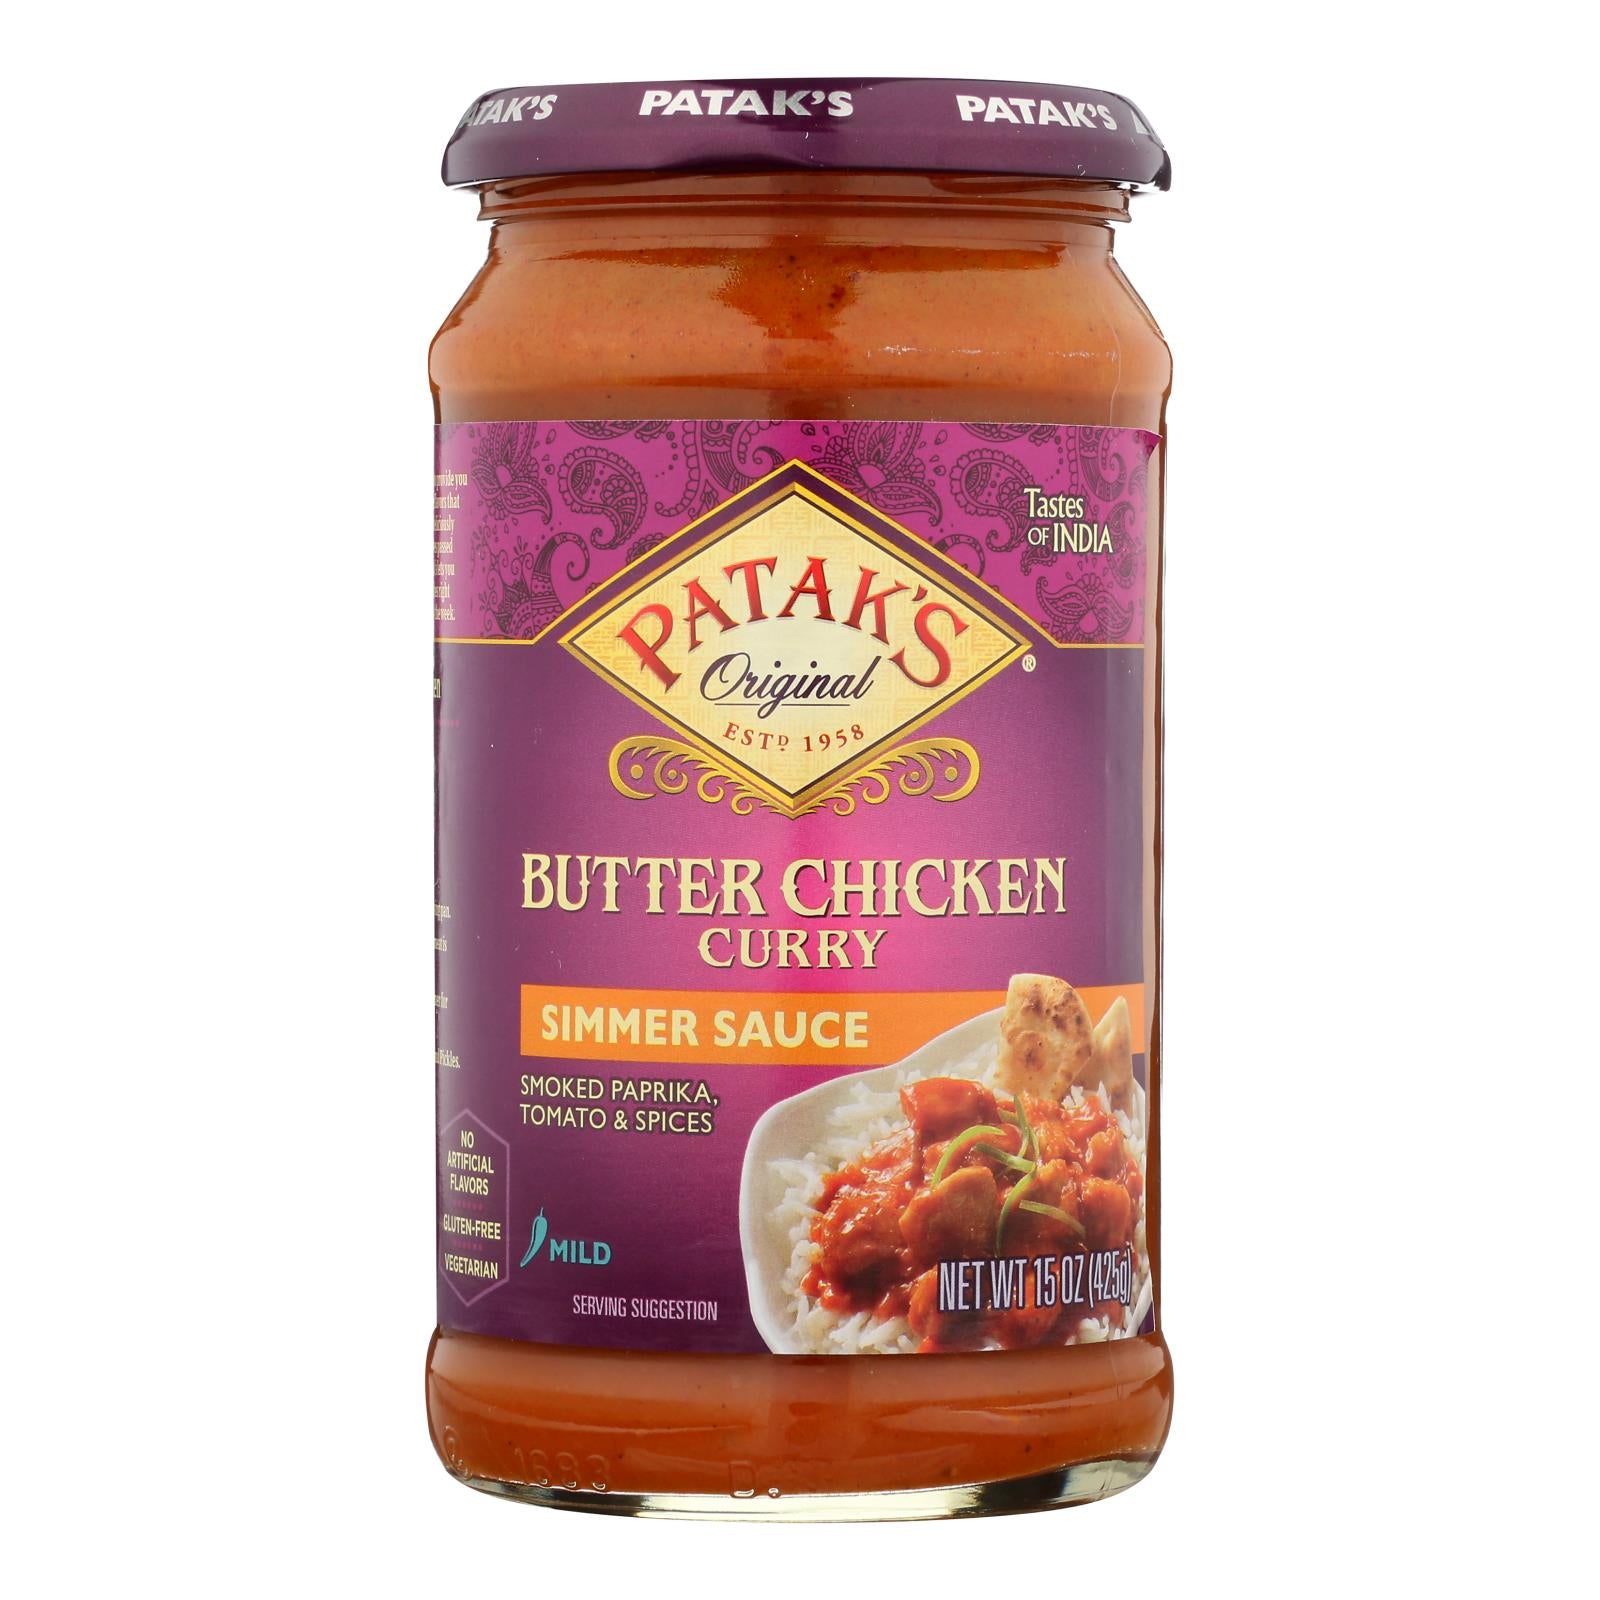 Pataks Simmer Sauce - Butter Chicken Curry - Mild - 15 Oz - Case Of 6